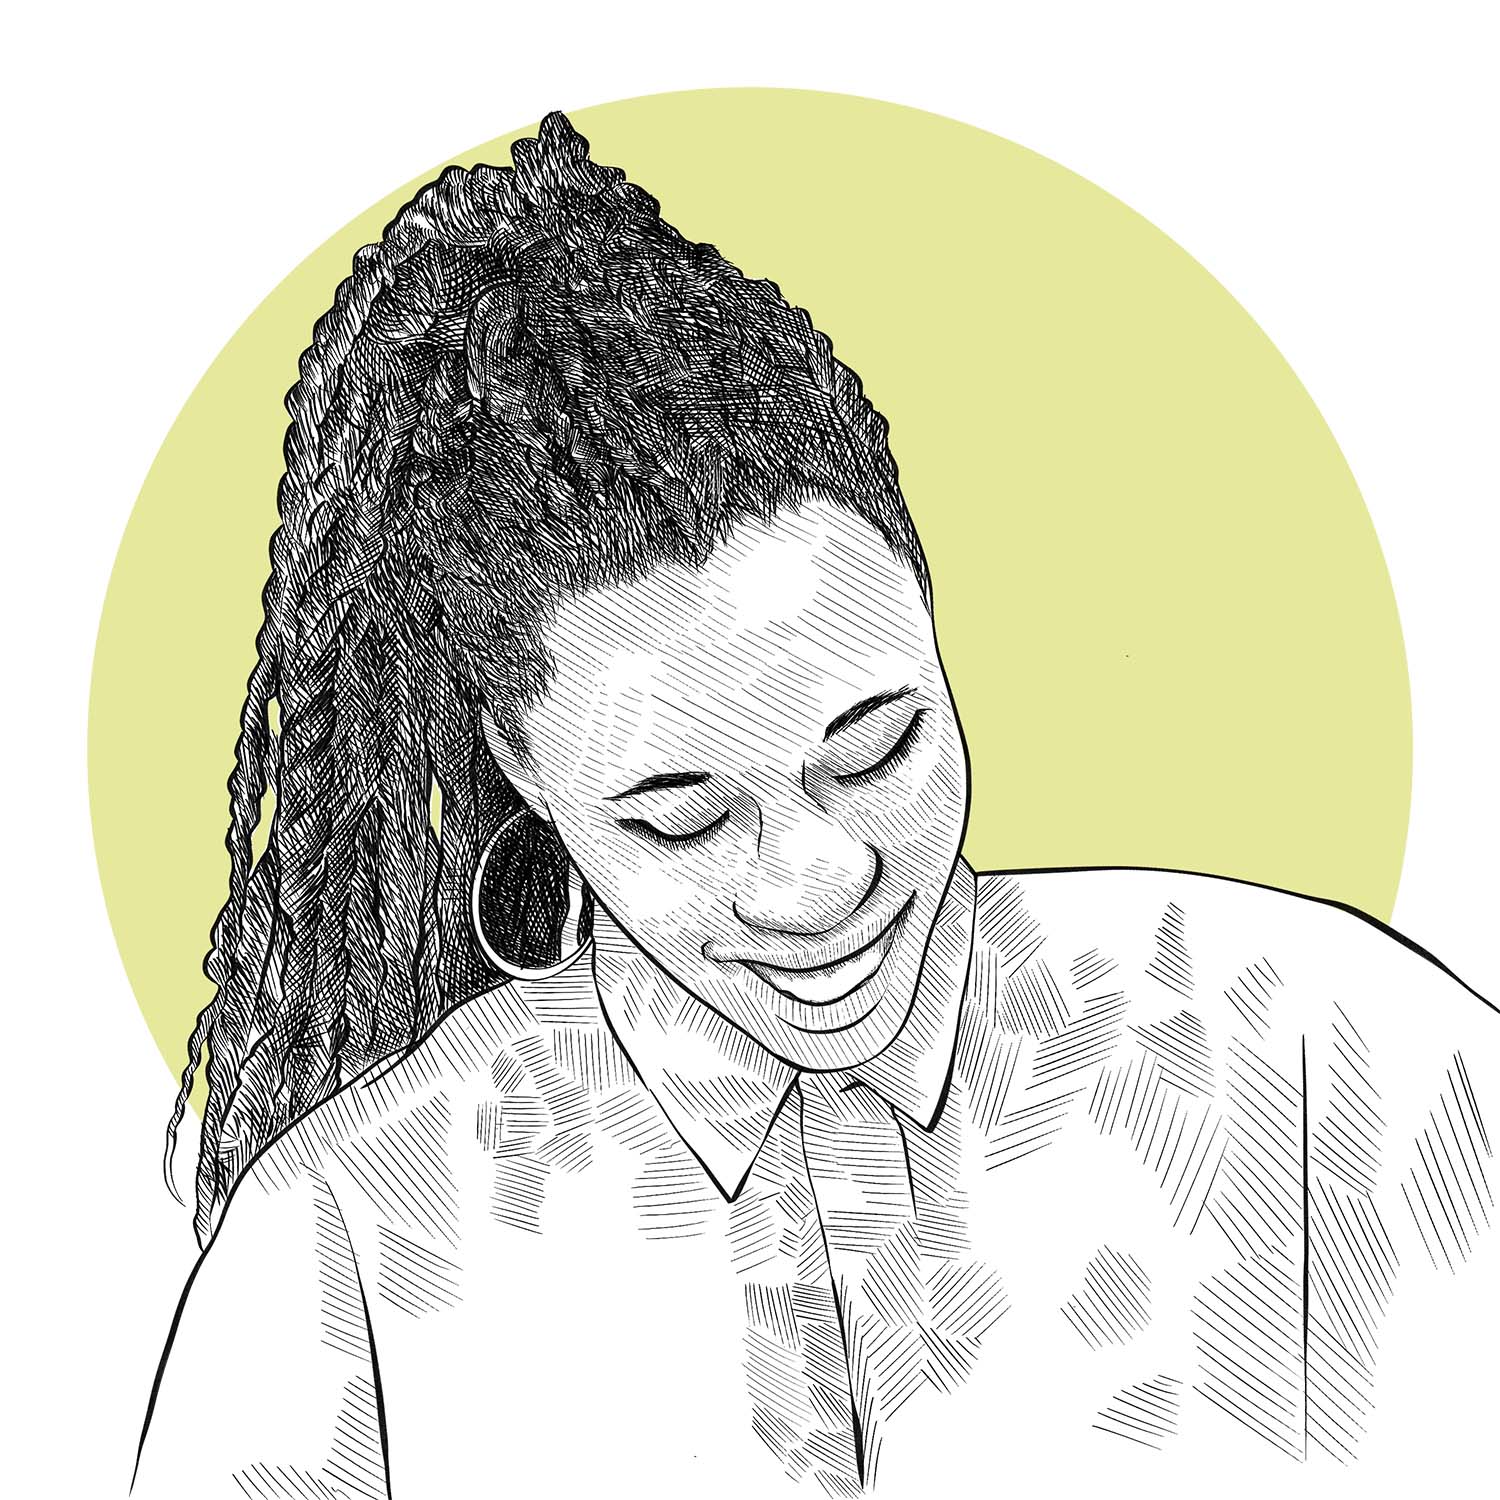 Black and white illustration of a women with braided hair looking down and smiling